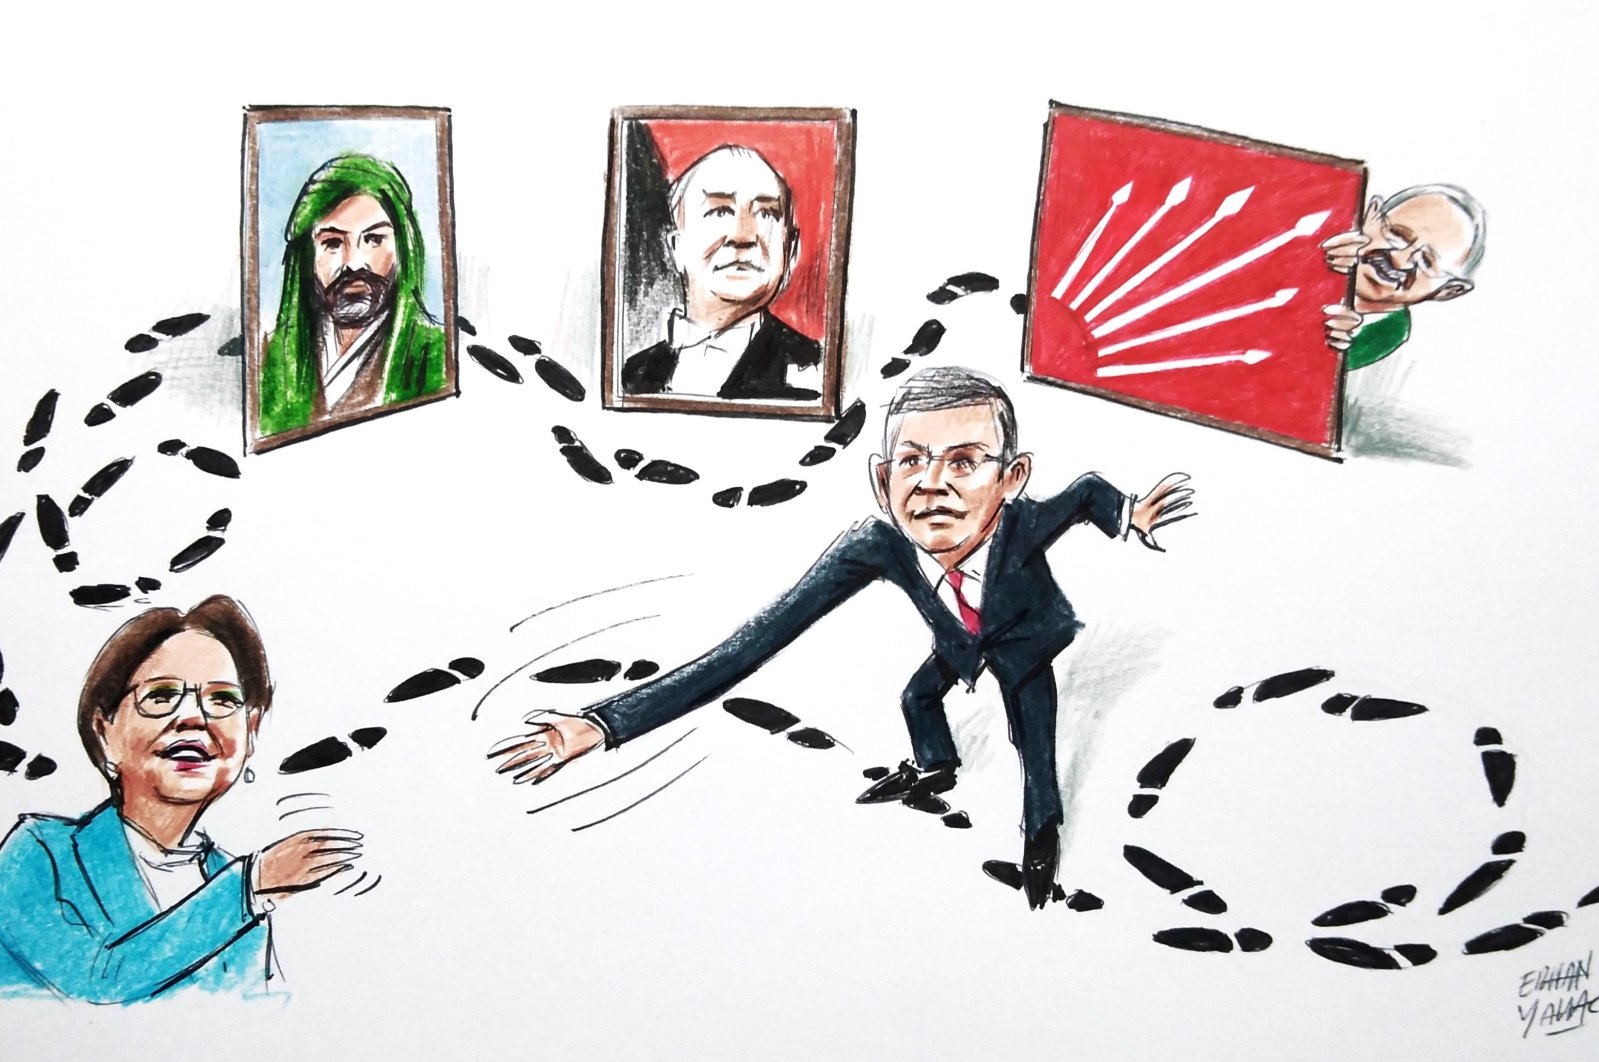 &quot;Within the context of party politics, Republican People&#039;s Party (CHP) Chair Özgür Özel follows in his predecessor Kemal Kılıçdaroğlu’s footsteps and reaches out to the Peoples’ Democratic Party (HDP) and the Good Party (IP) before others because those two parties remain the most important counterparts.&quot; (Illustration by Erhan Yalvaç)